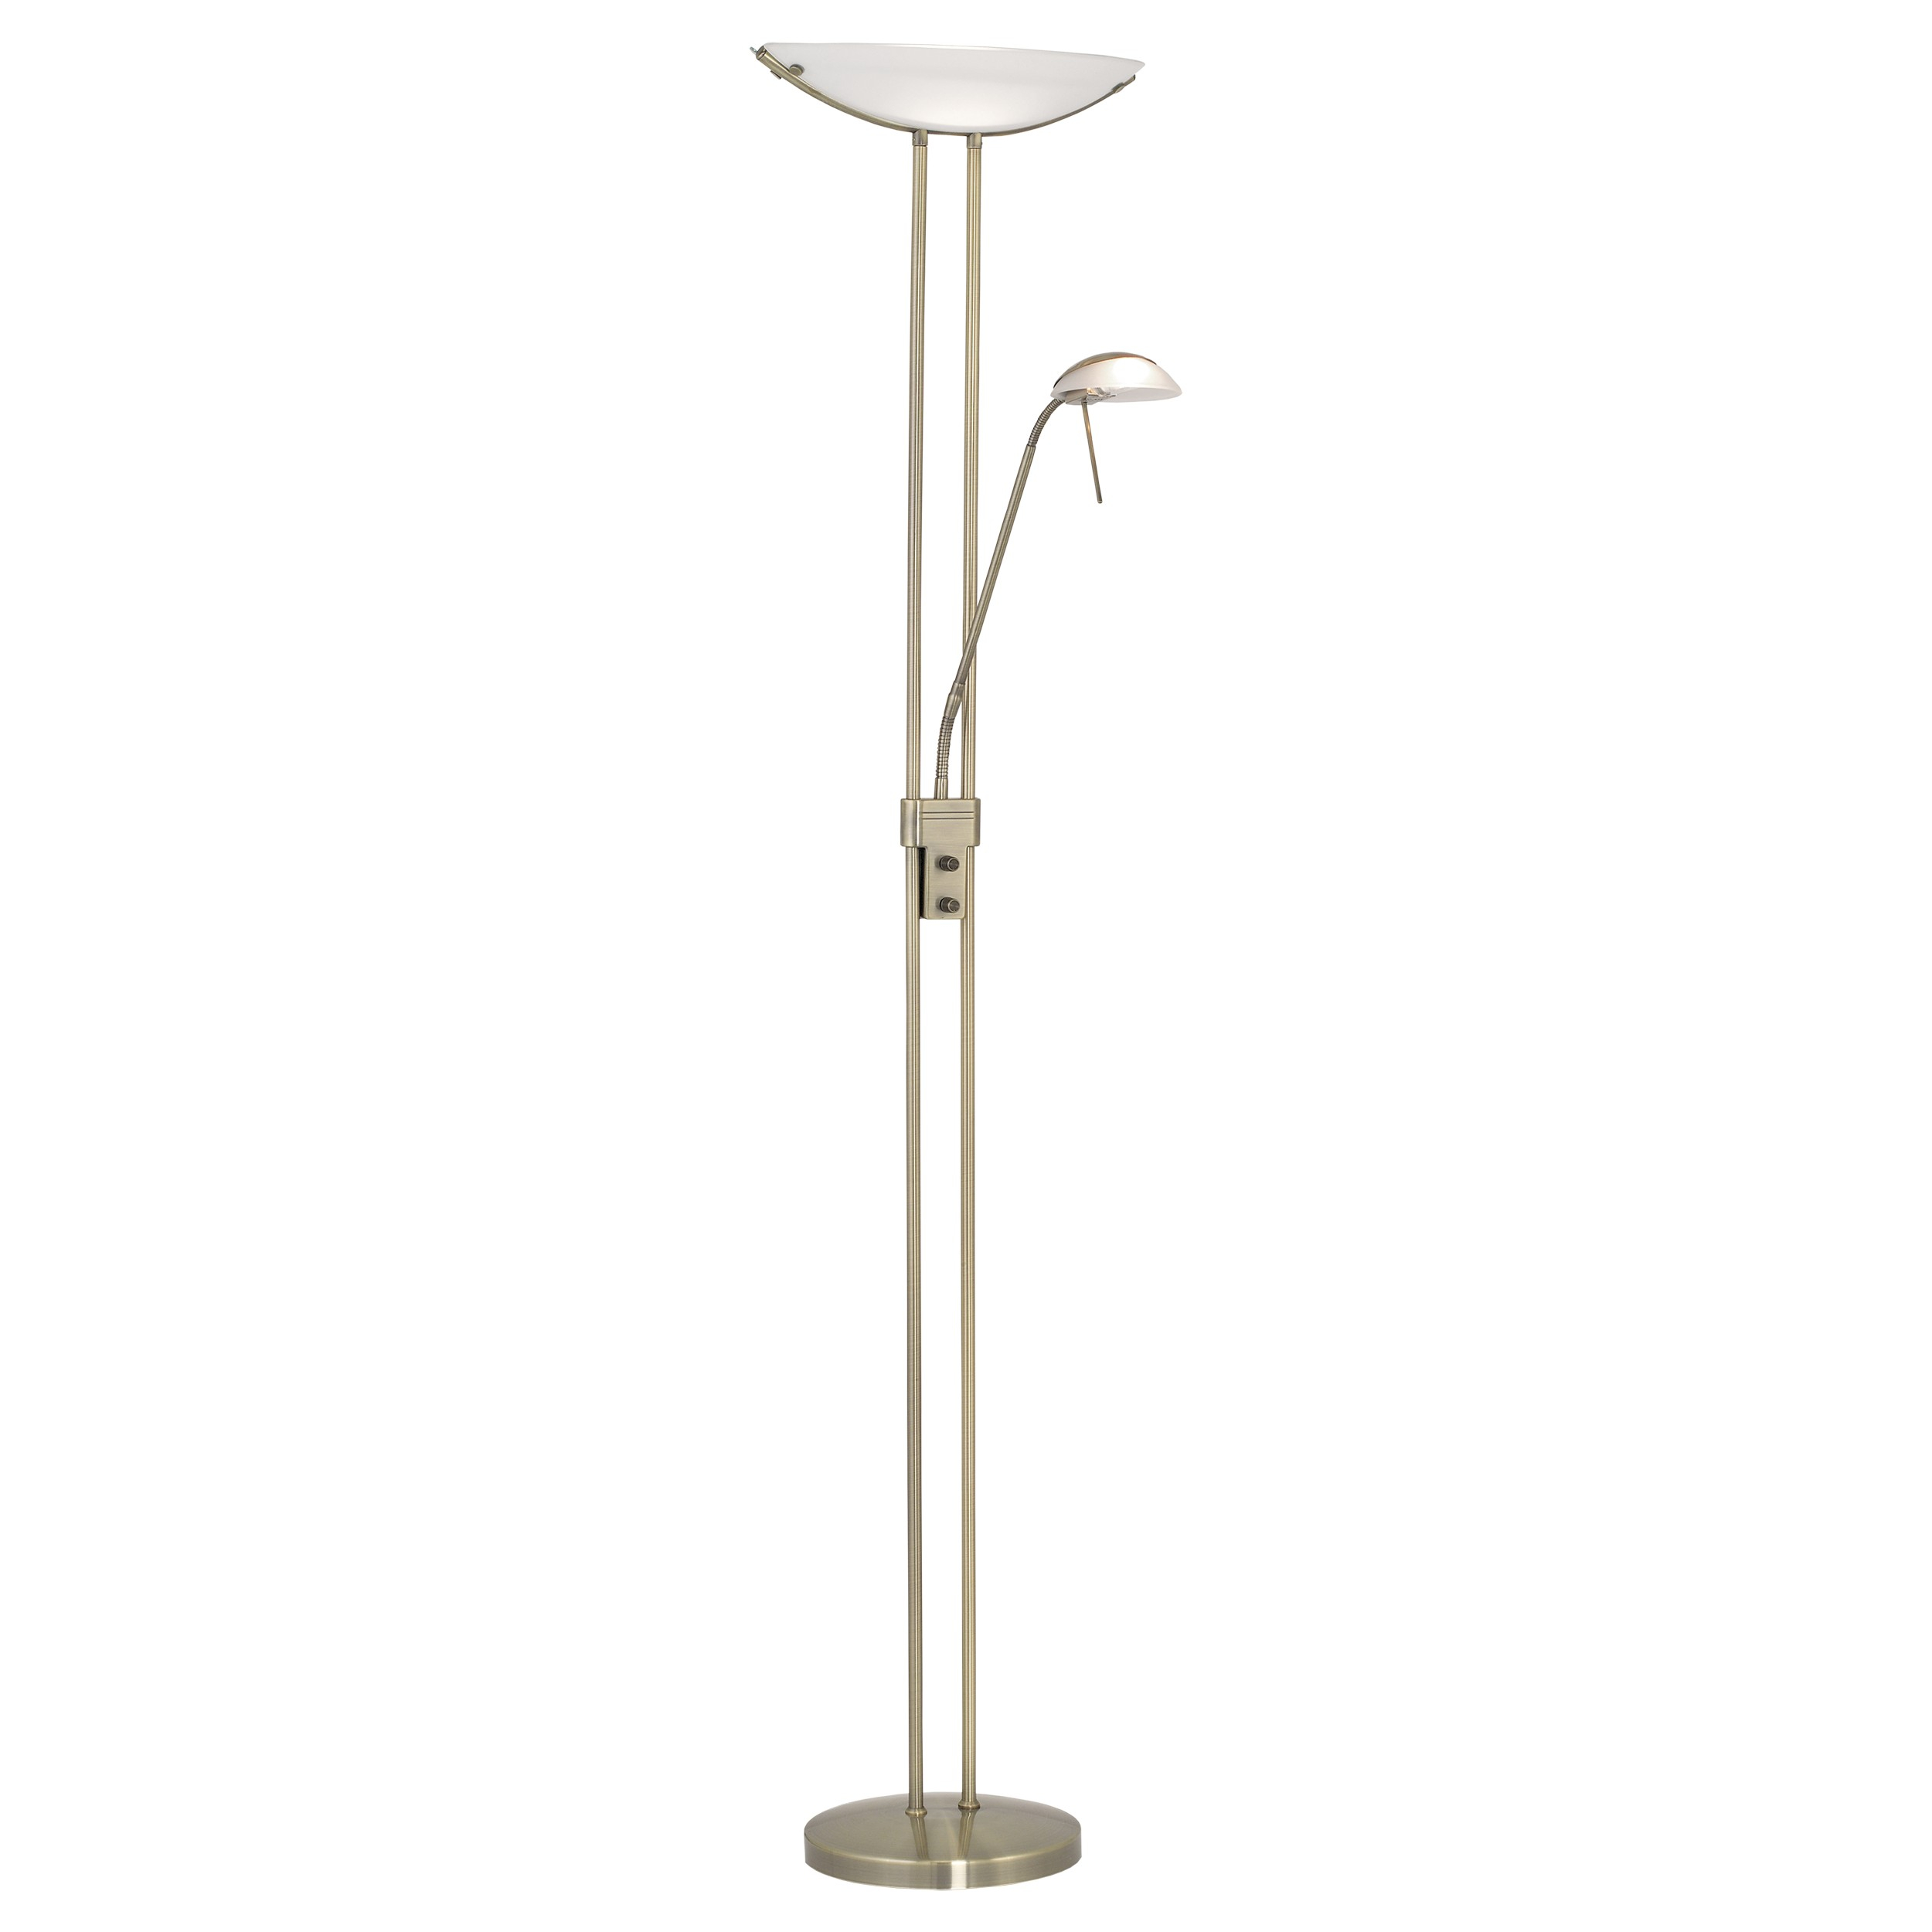 2 Light Traditional Dimmer Floor Lamp Bronzed And Glass intended for proportions 2500 X 2500